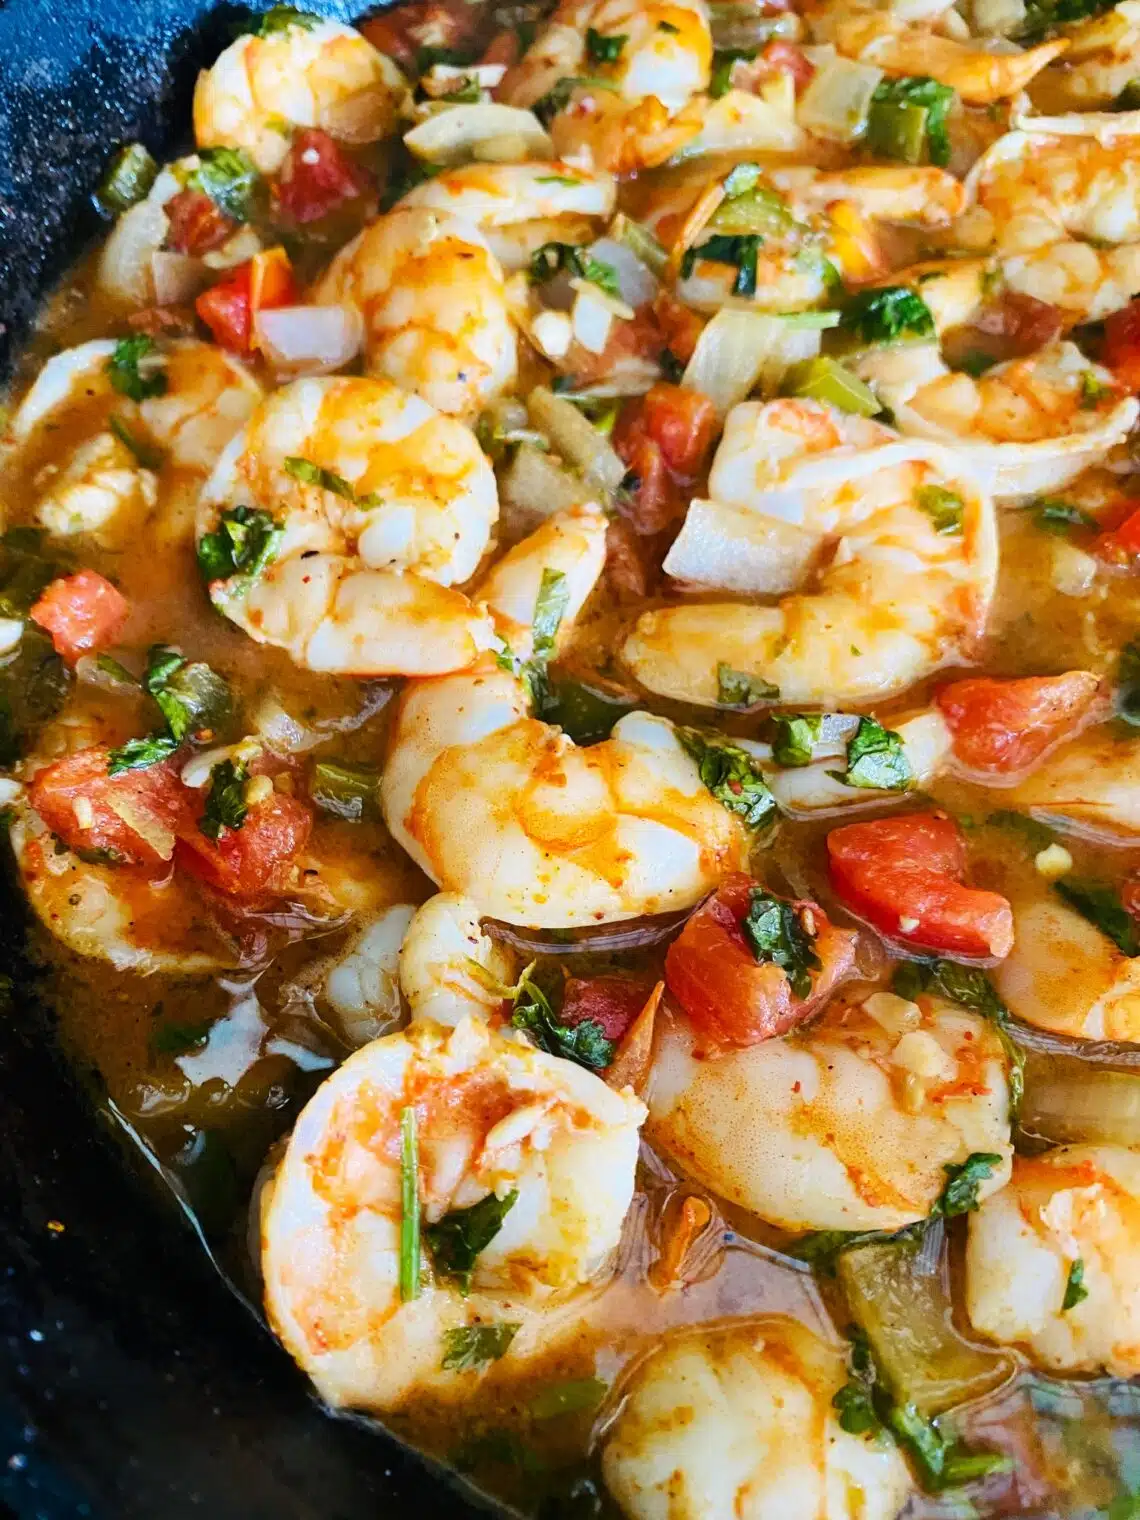 Smoked Tequila Lime Shrimp